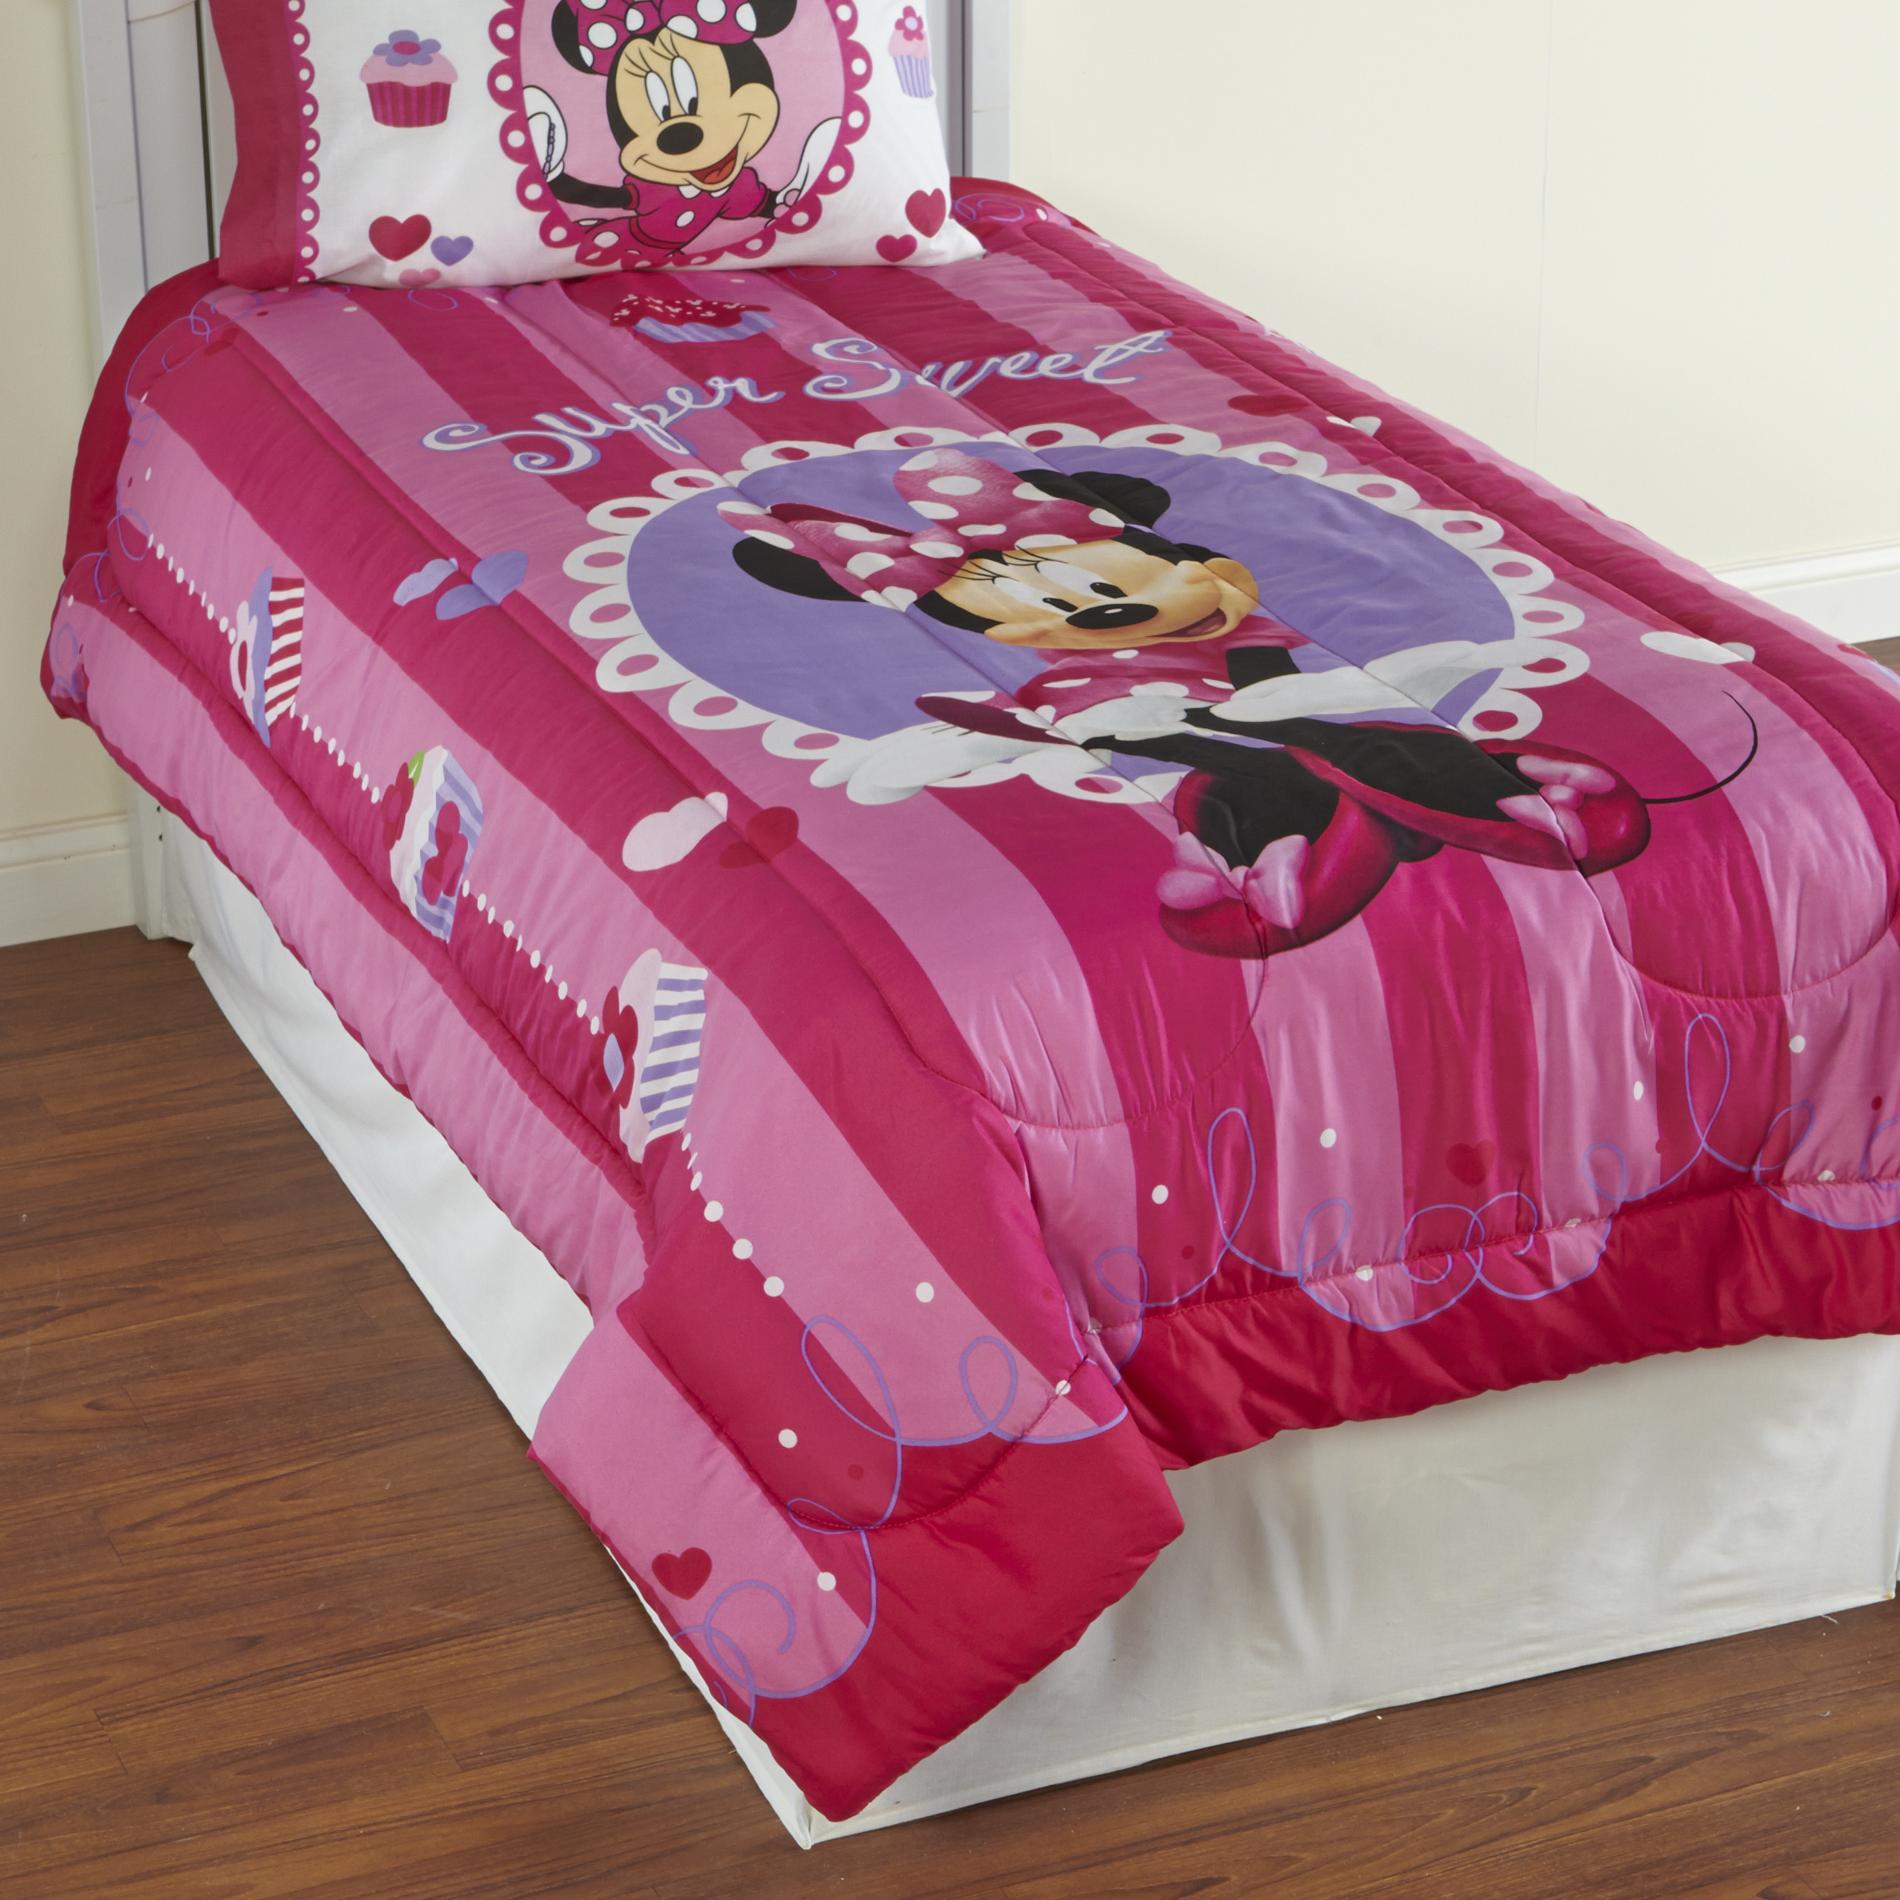 Twin Comforter - Minnie Mouse